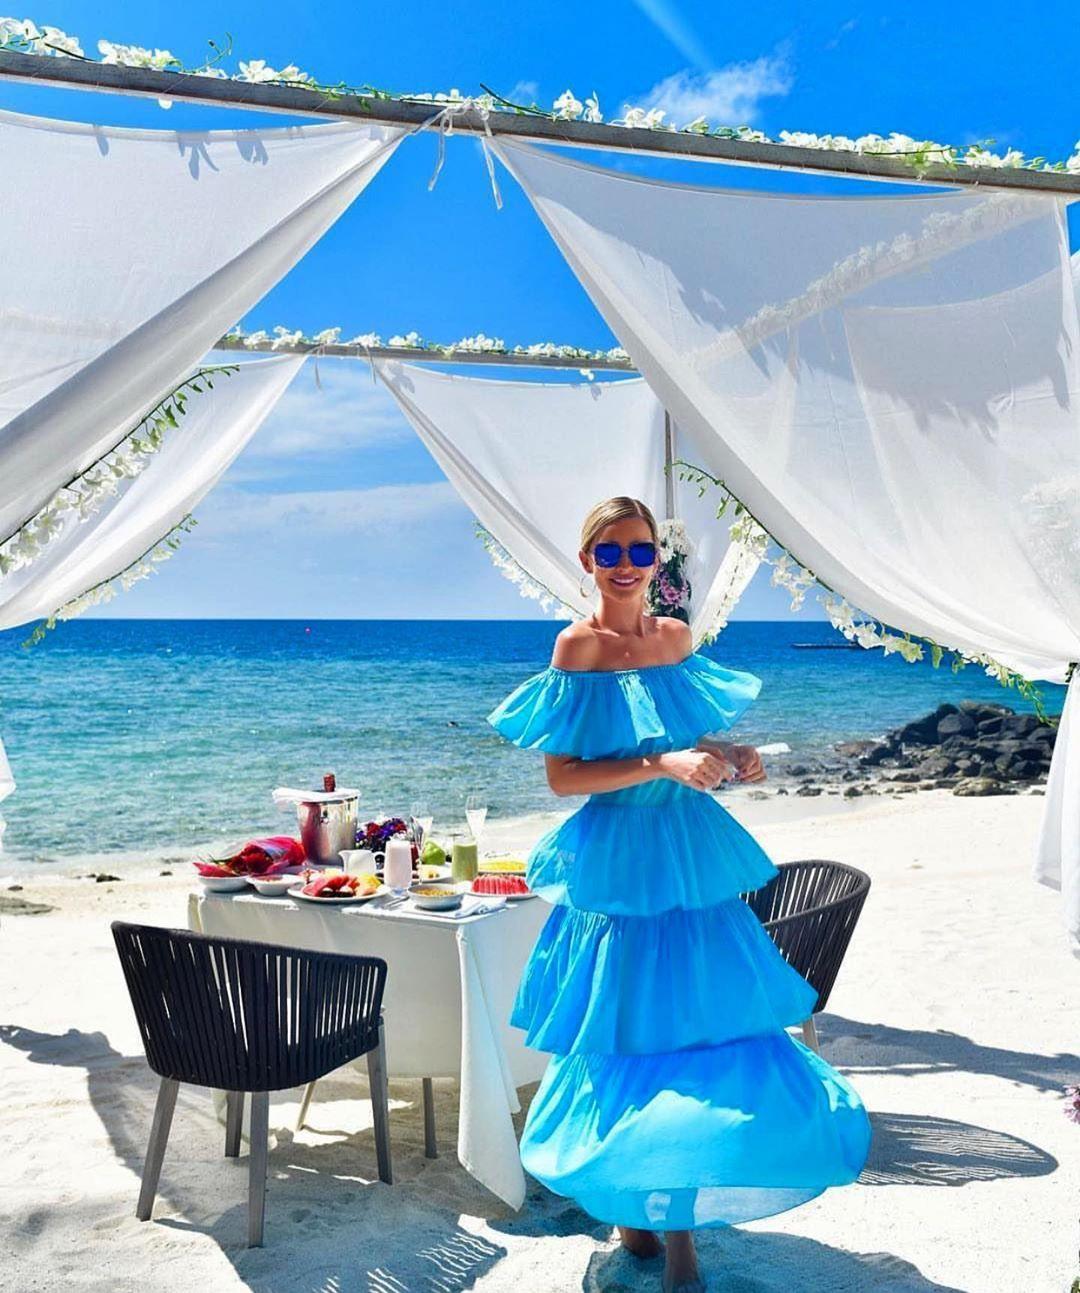 Customizable Fairytale Honeymoon Tulle Skirt Short Blue Prom Dresses With  Short Flower Applique Perfect For Event Wear And Parties Available In Plus  Sizes From Linda_wedding, $117 | DHgate.Com